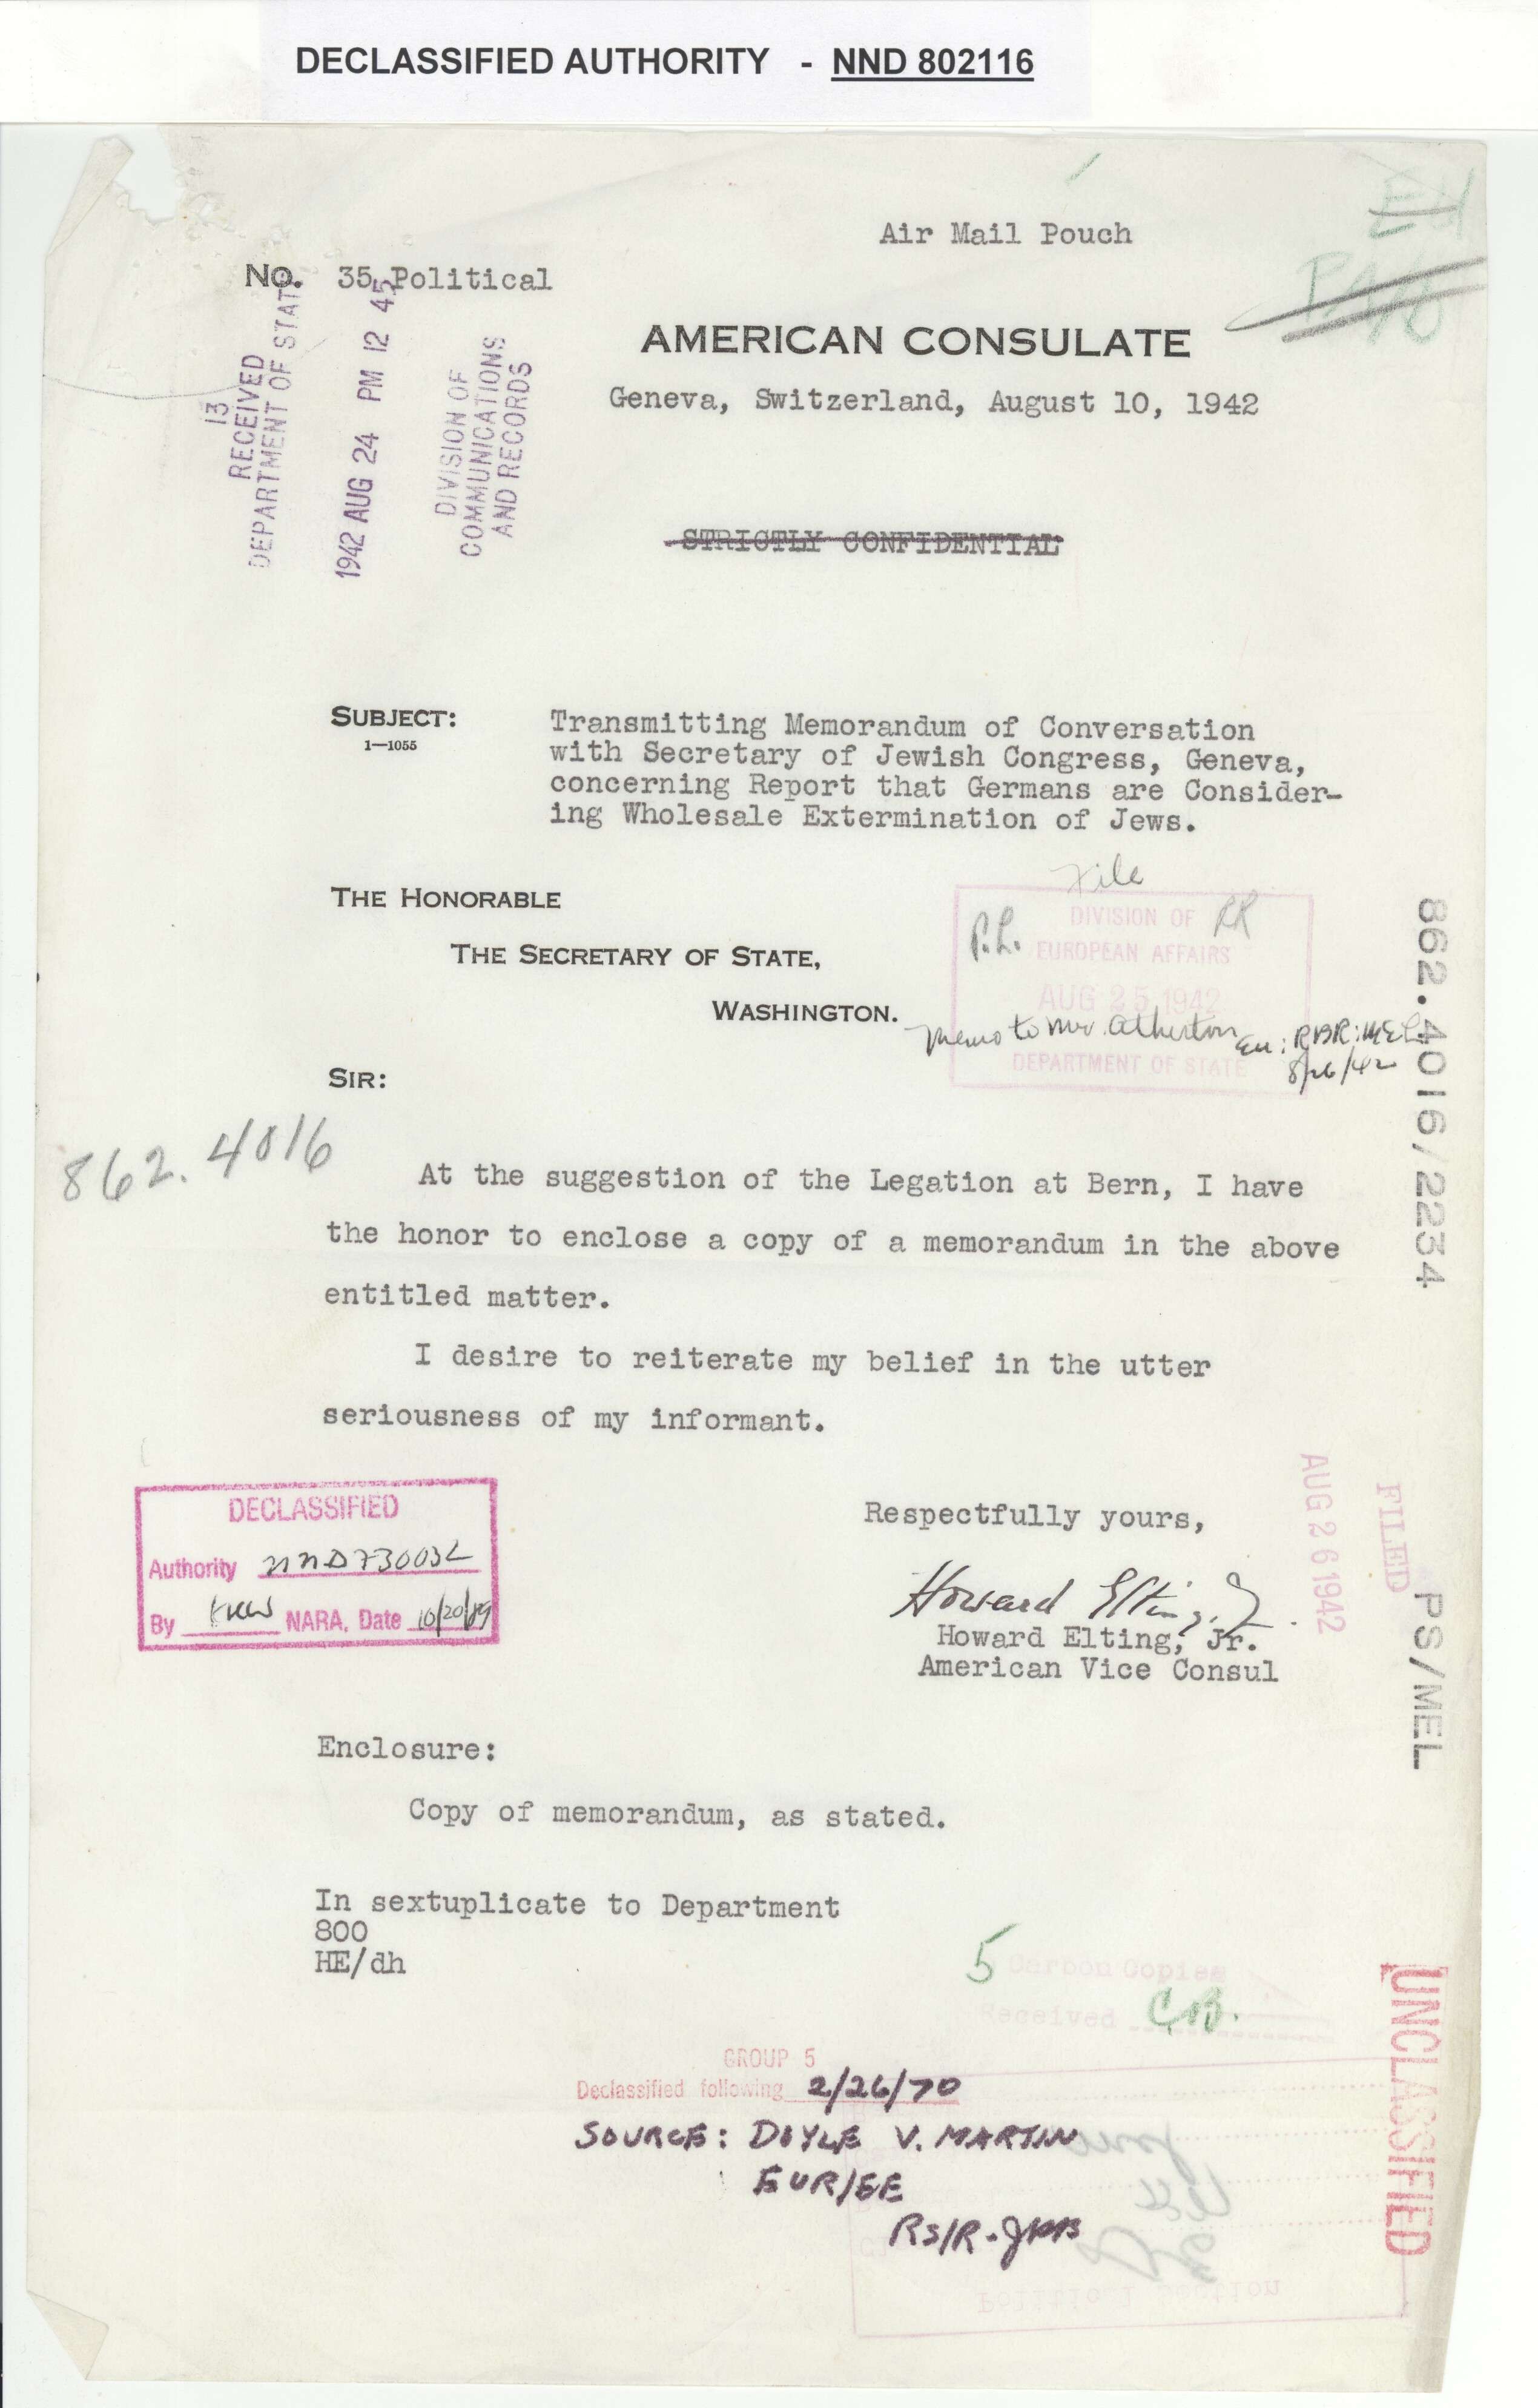 Correspondence from Howard Elting to Secretary of State related to the Holocaust